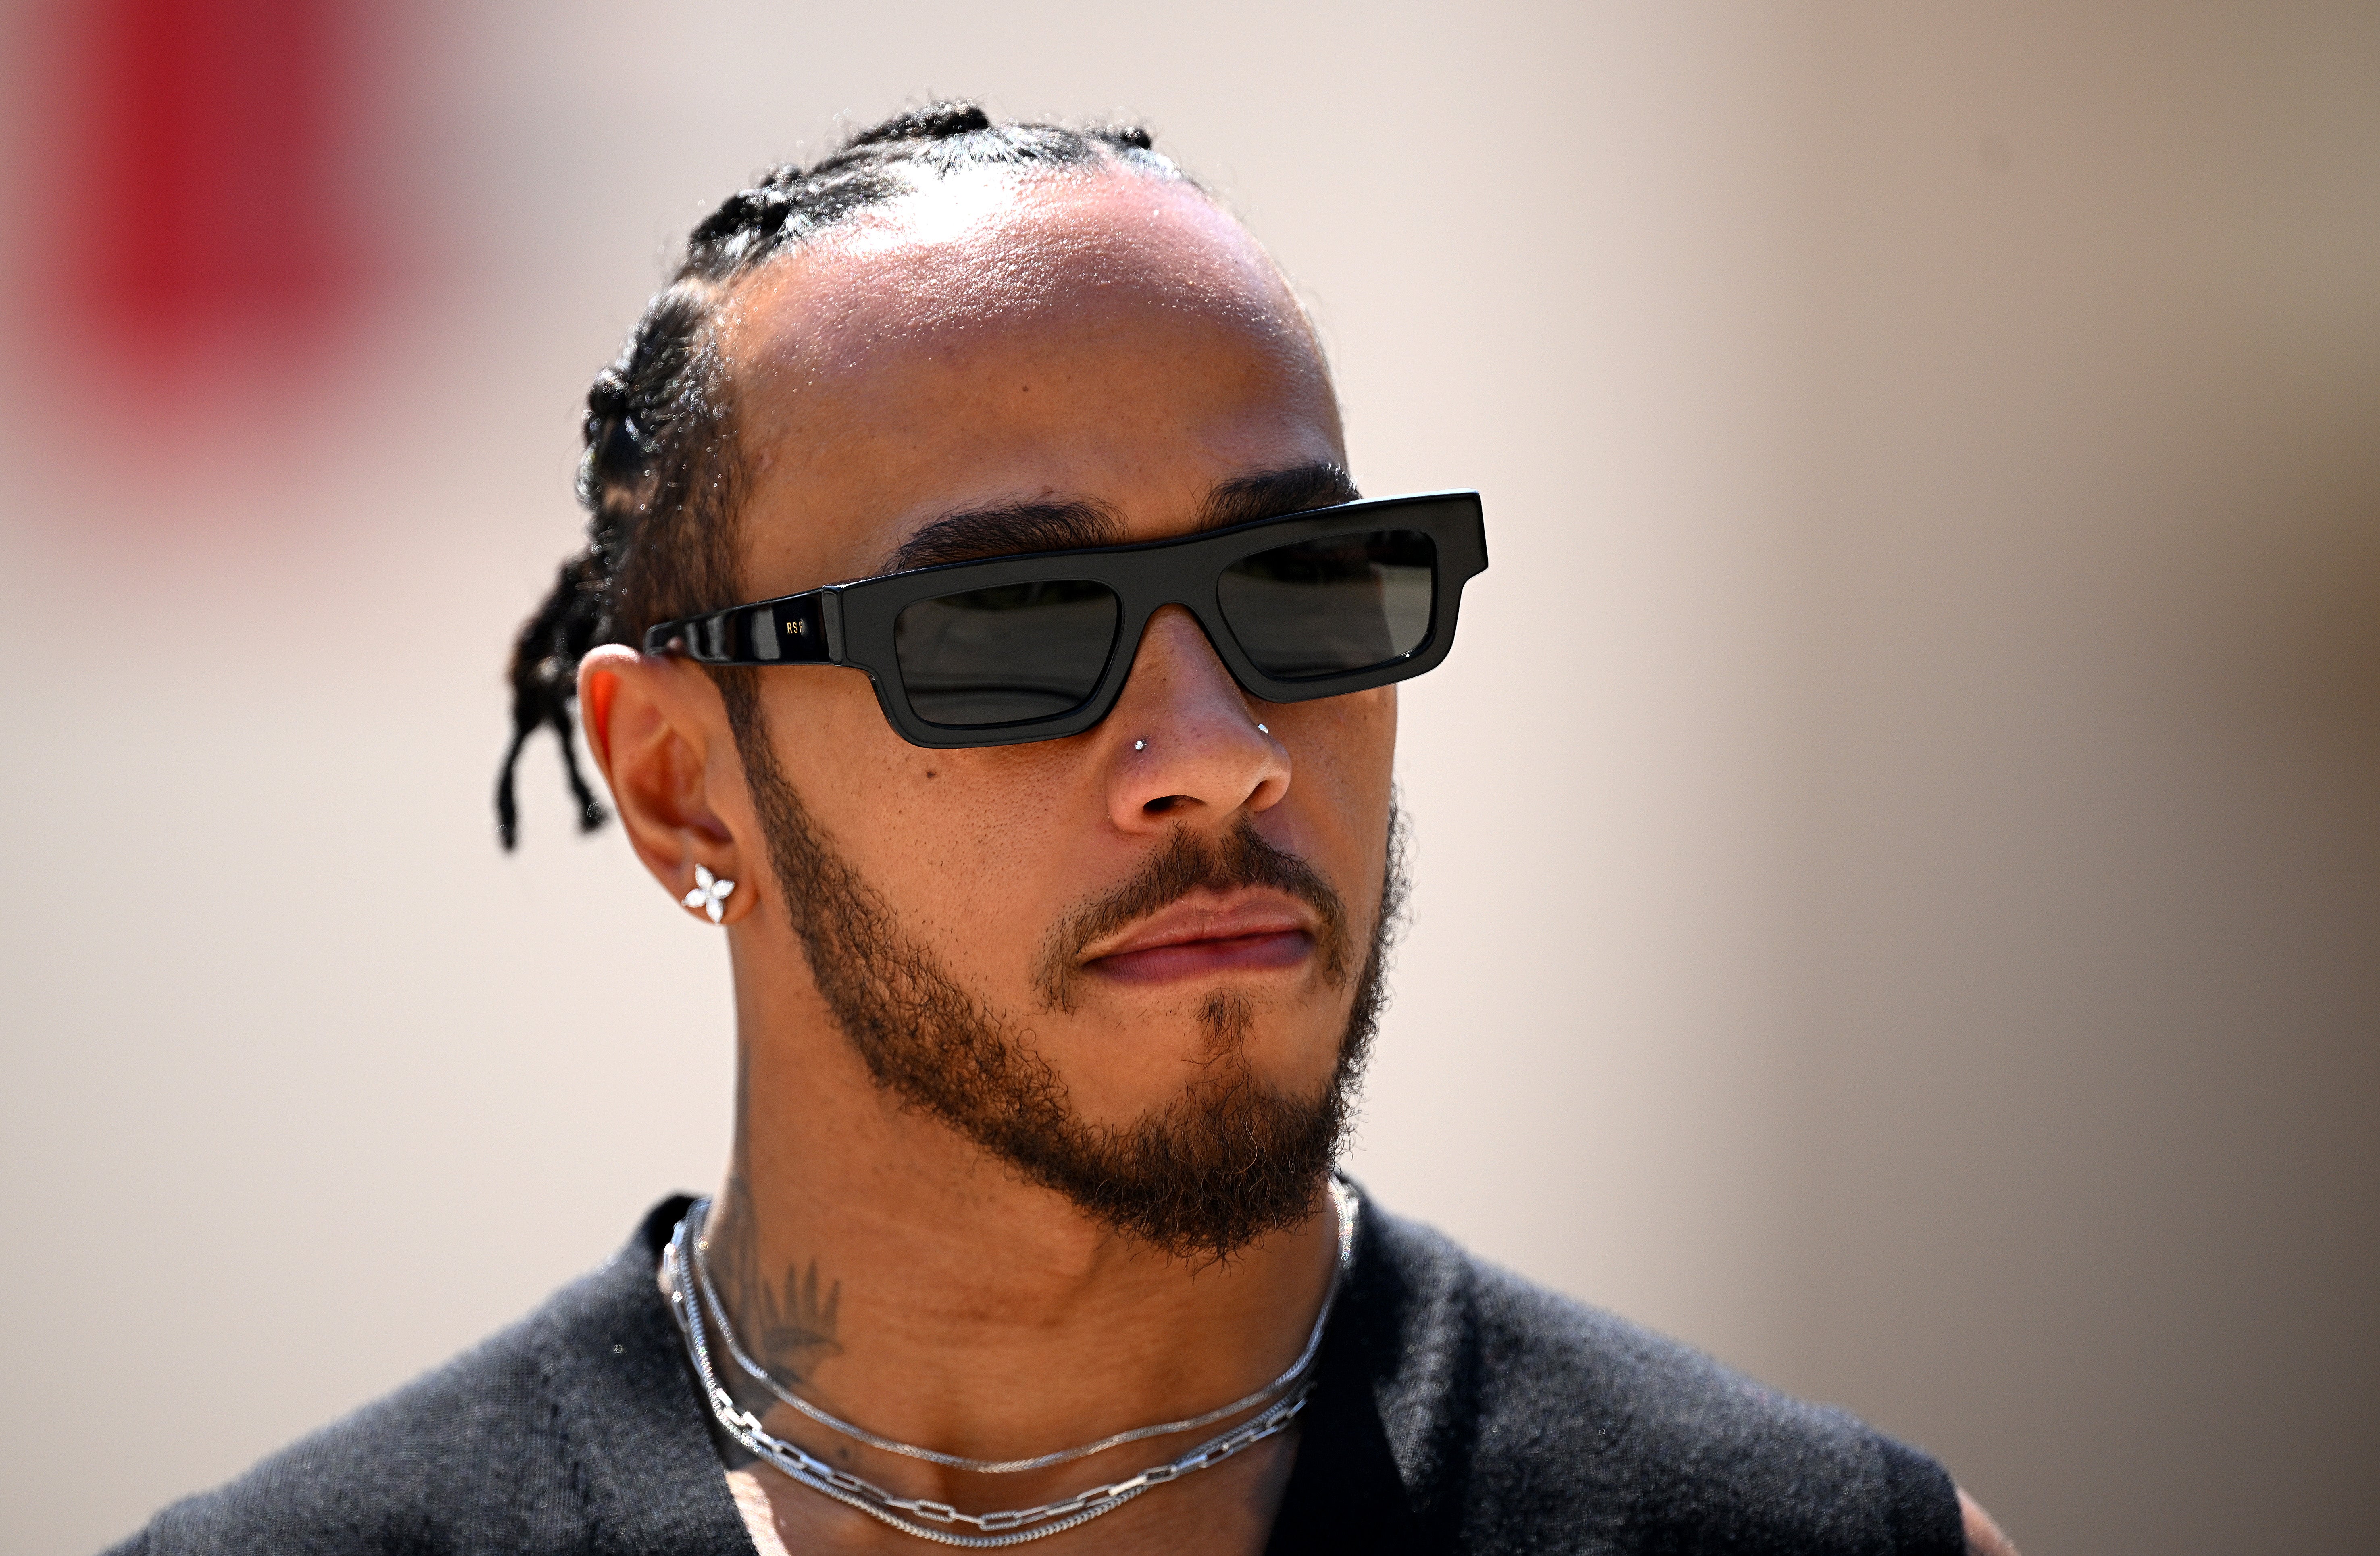 Lewis Hamilton’s future has been a topic of conversation at the start of the new season